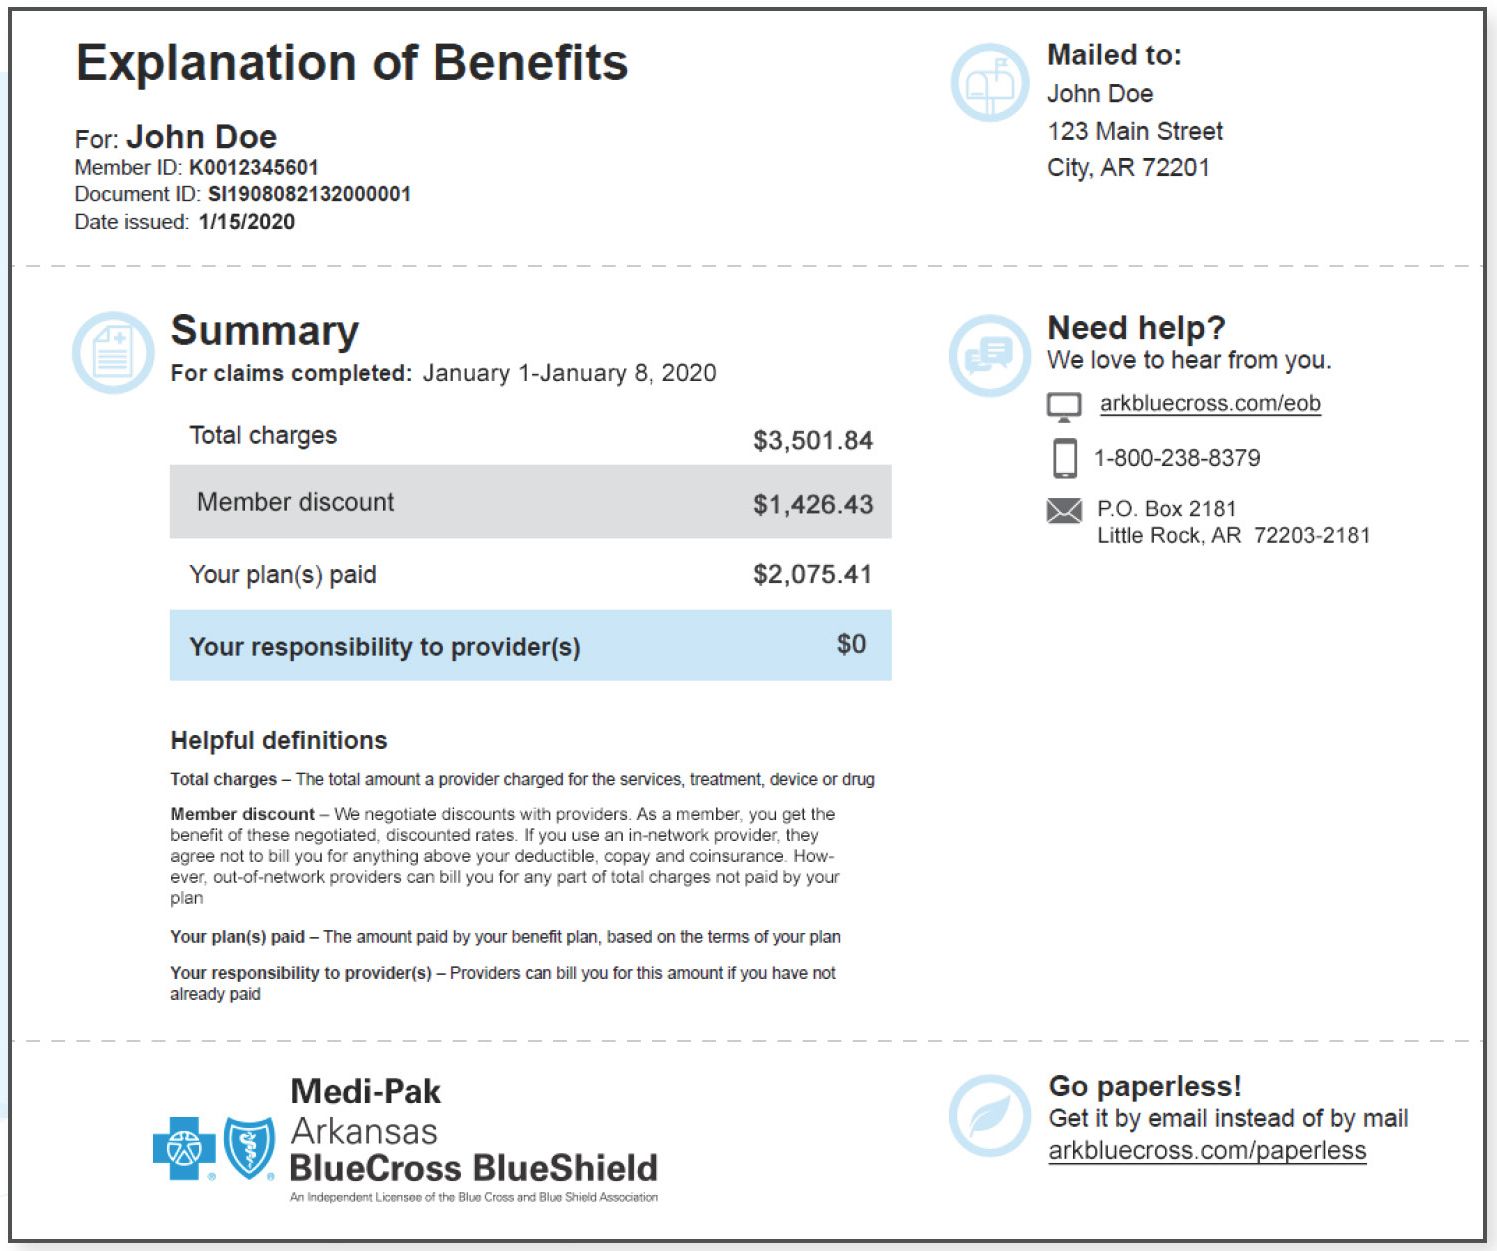 new design of explanation of benefits (EOB) form with clean, easy-to-read formatting